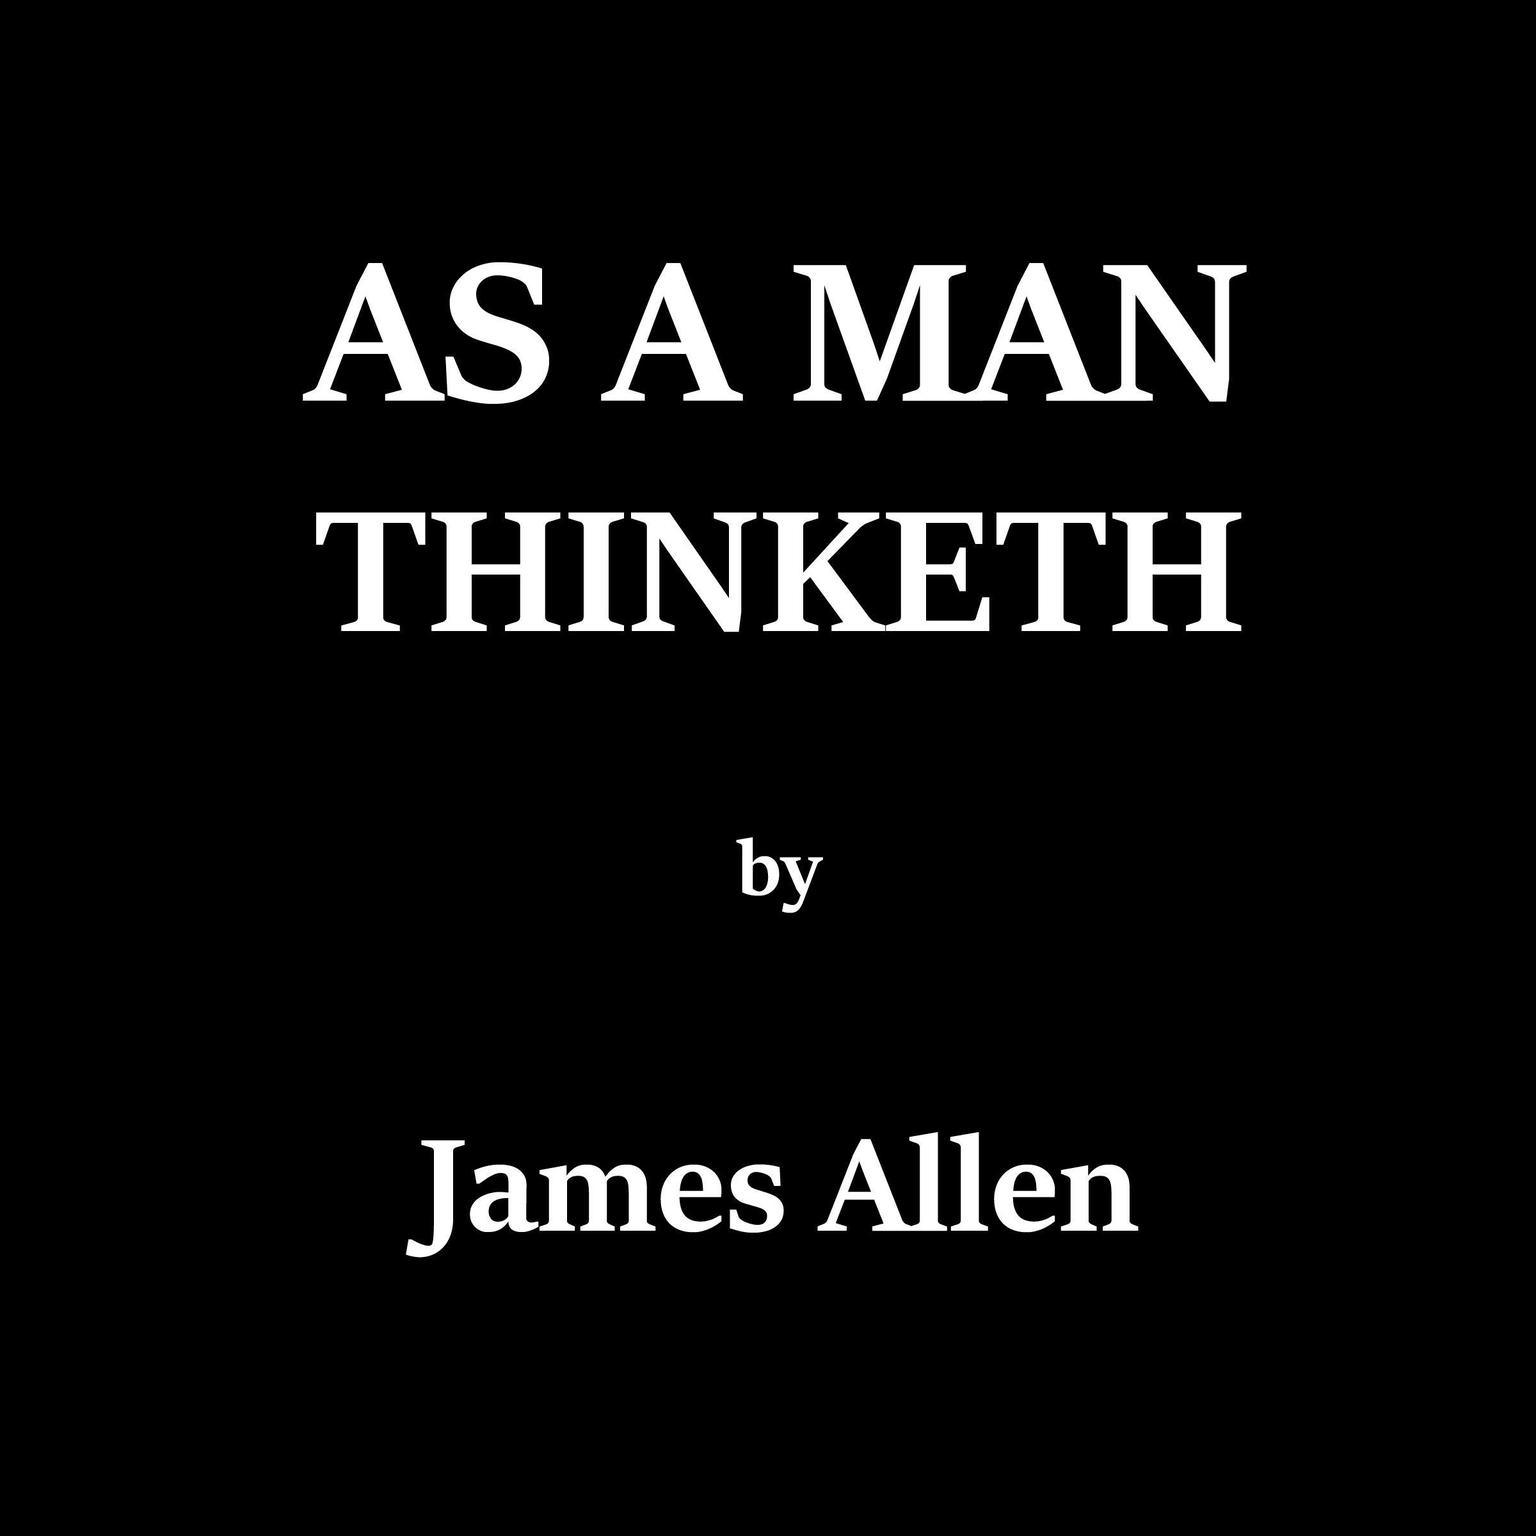 As A Man Thinketh Audiobook, by James Allen